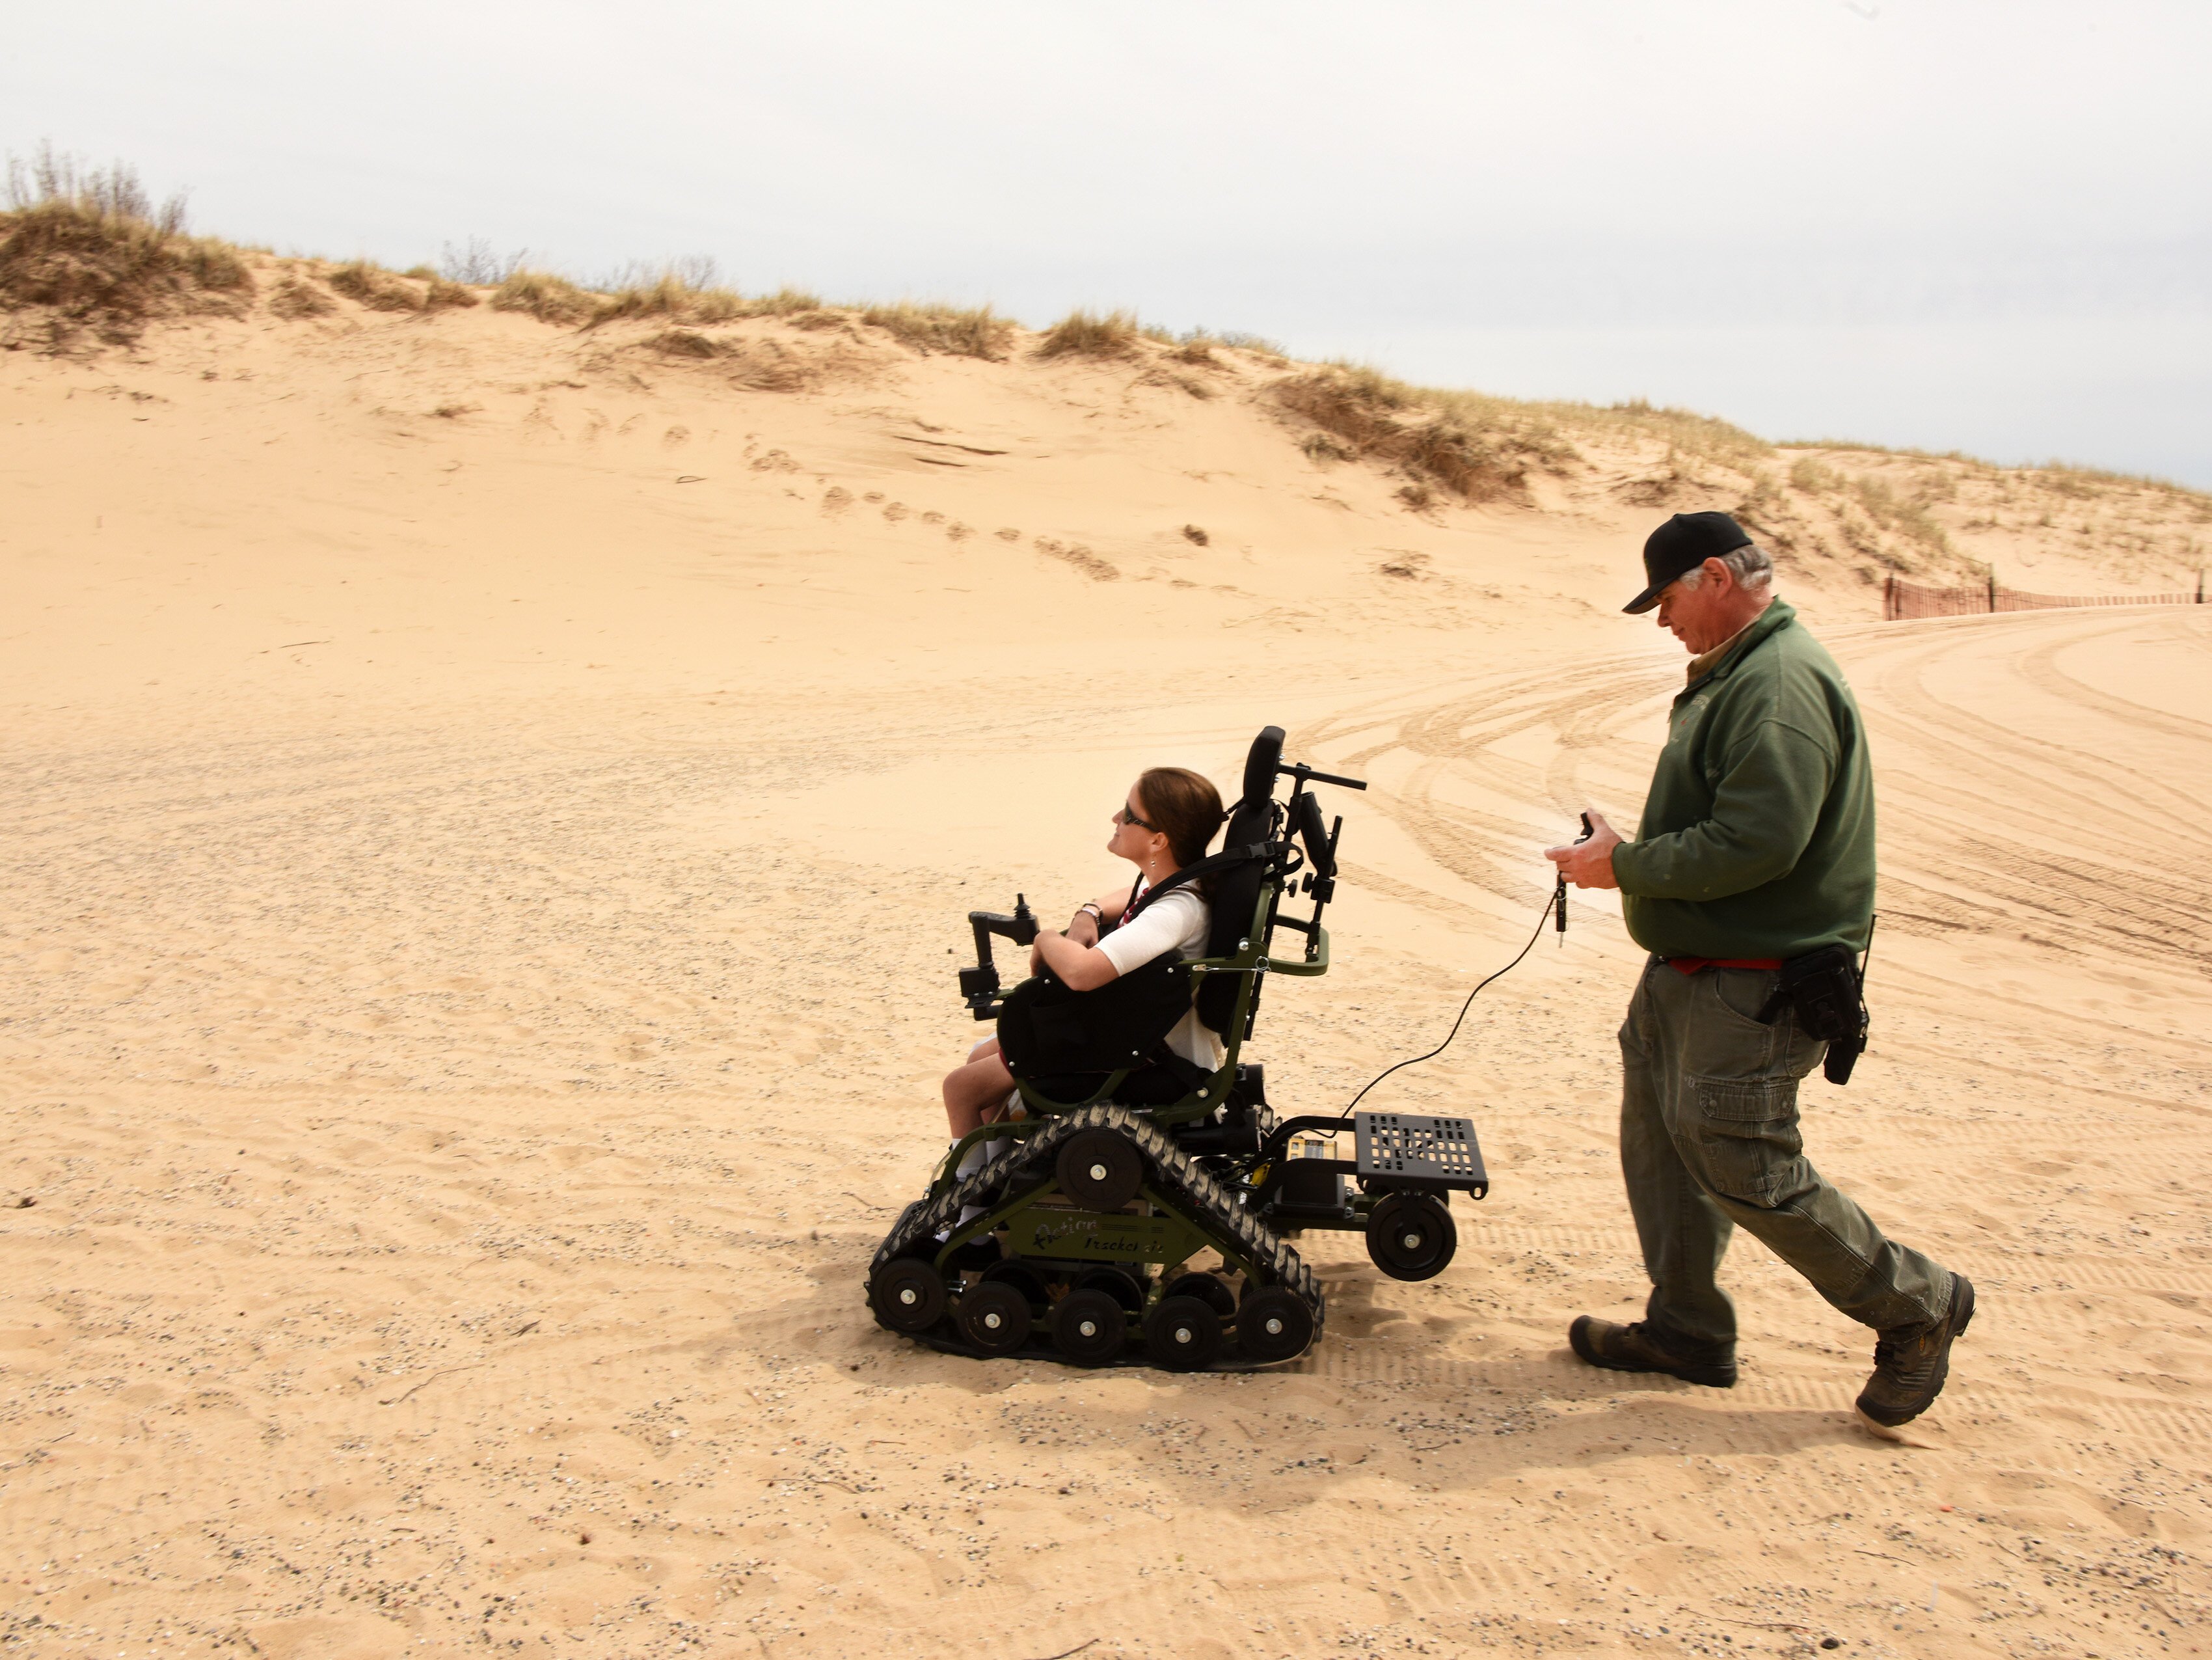 Jamie Spore explores the park's dunes on a track chair. 